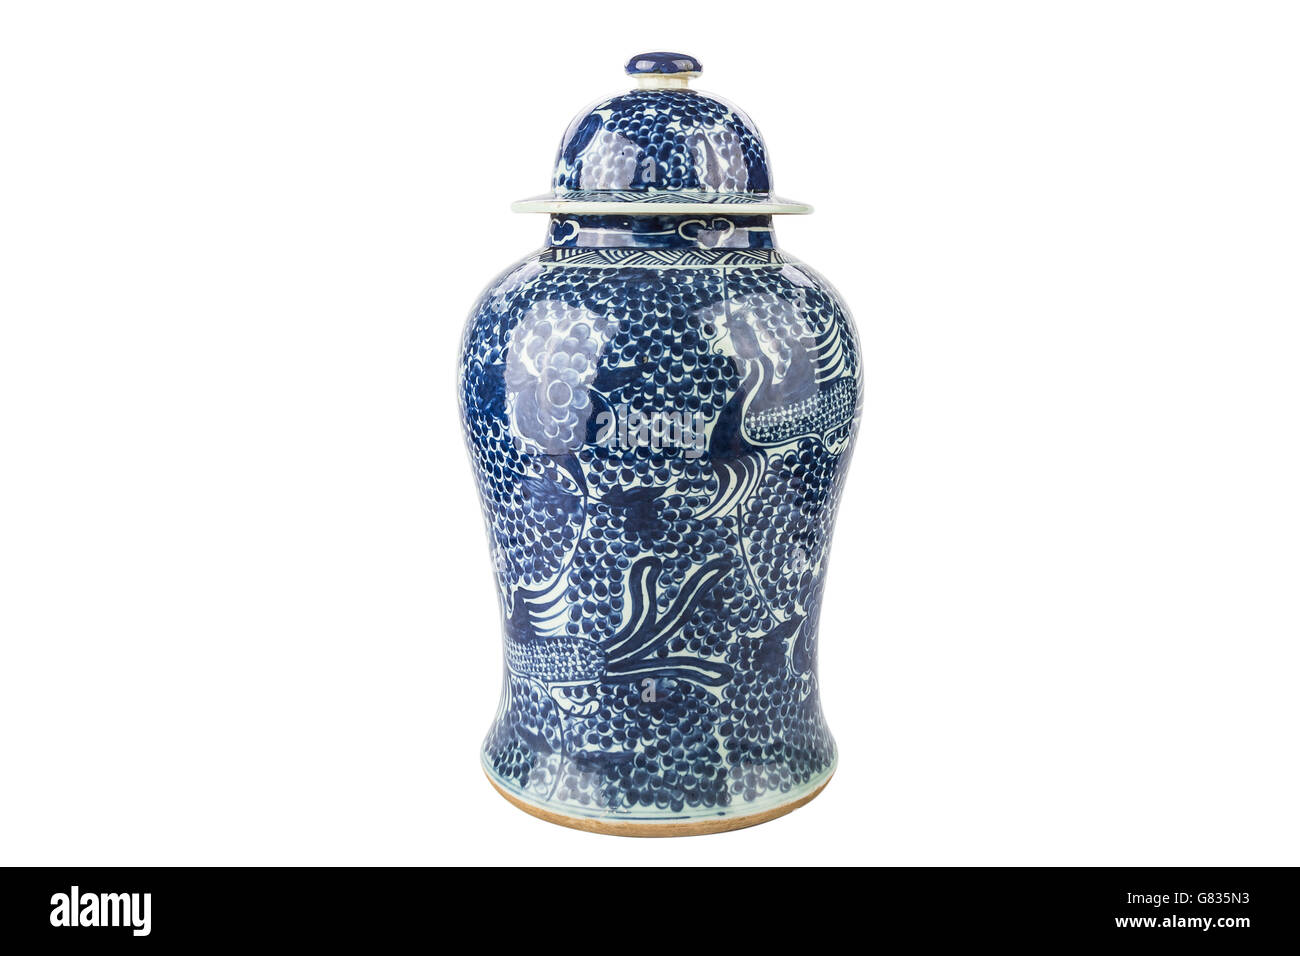 Antique traditional Chinese vase on a white background Stock Photo